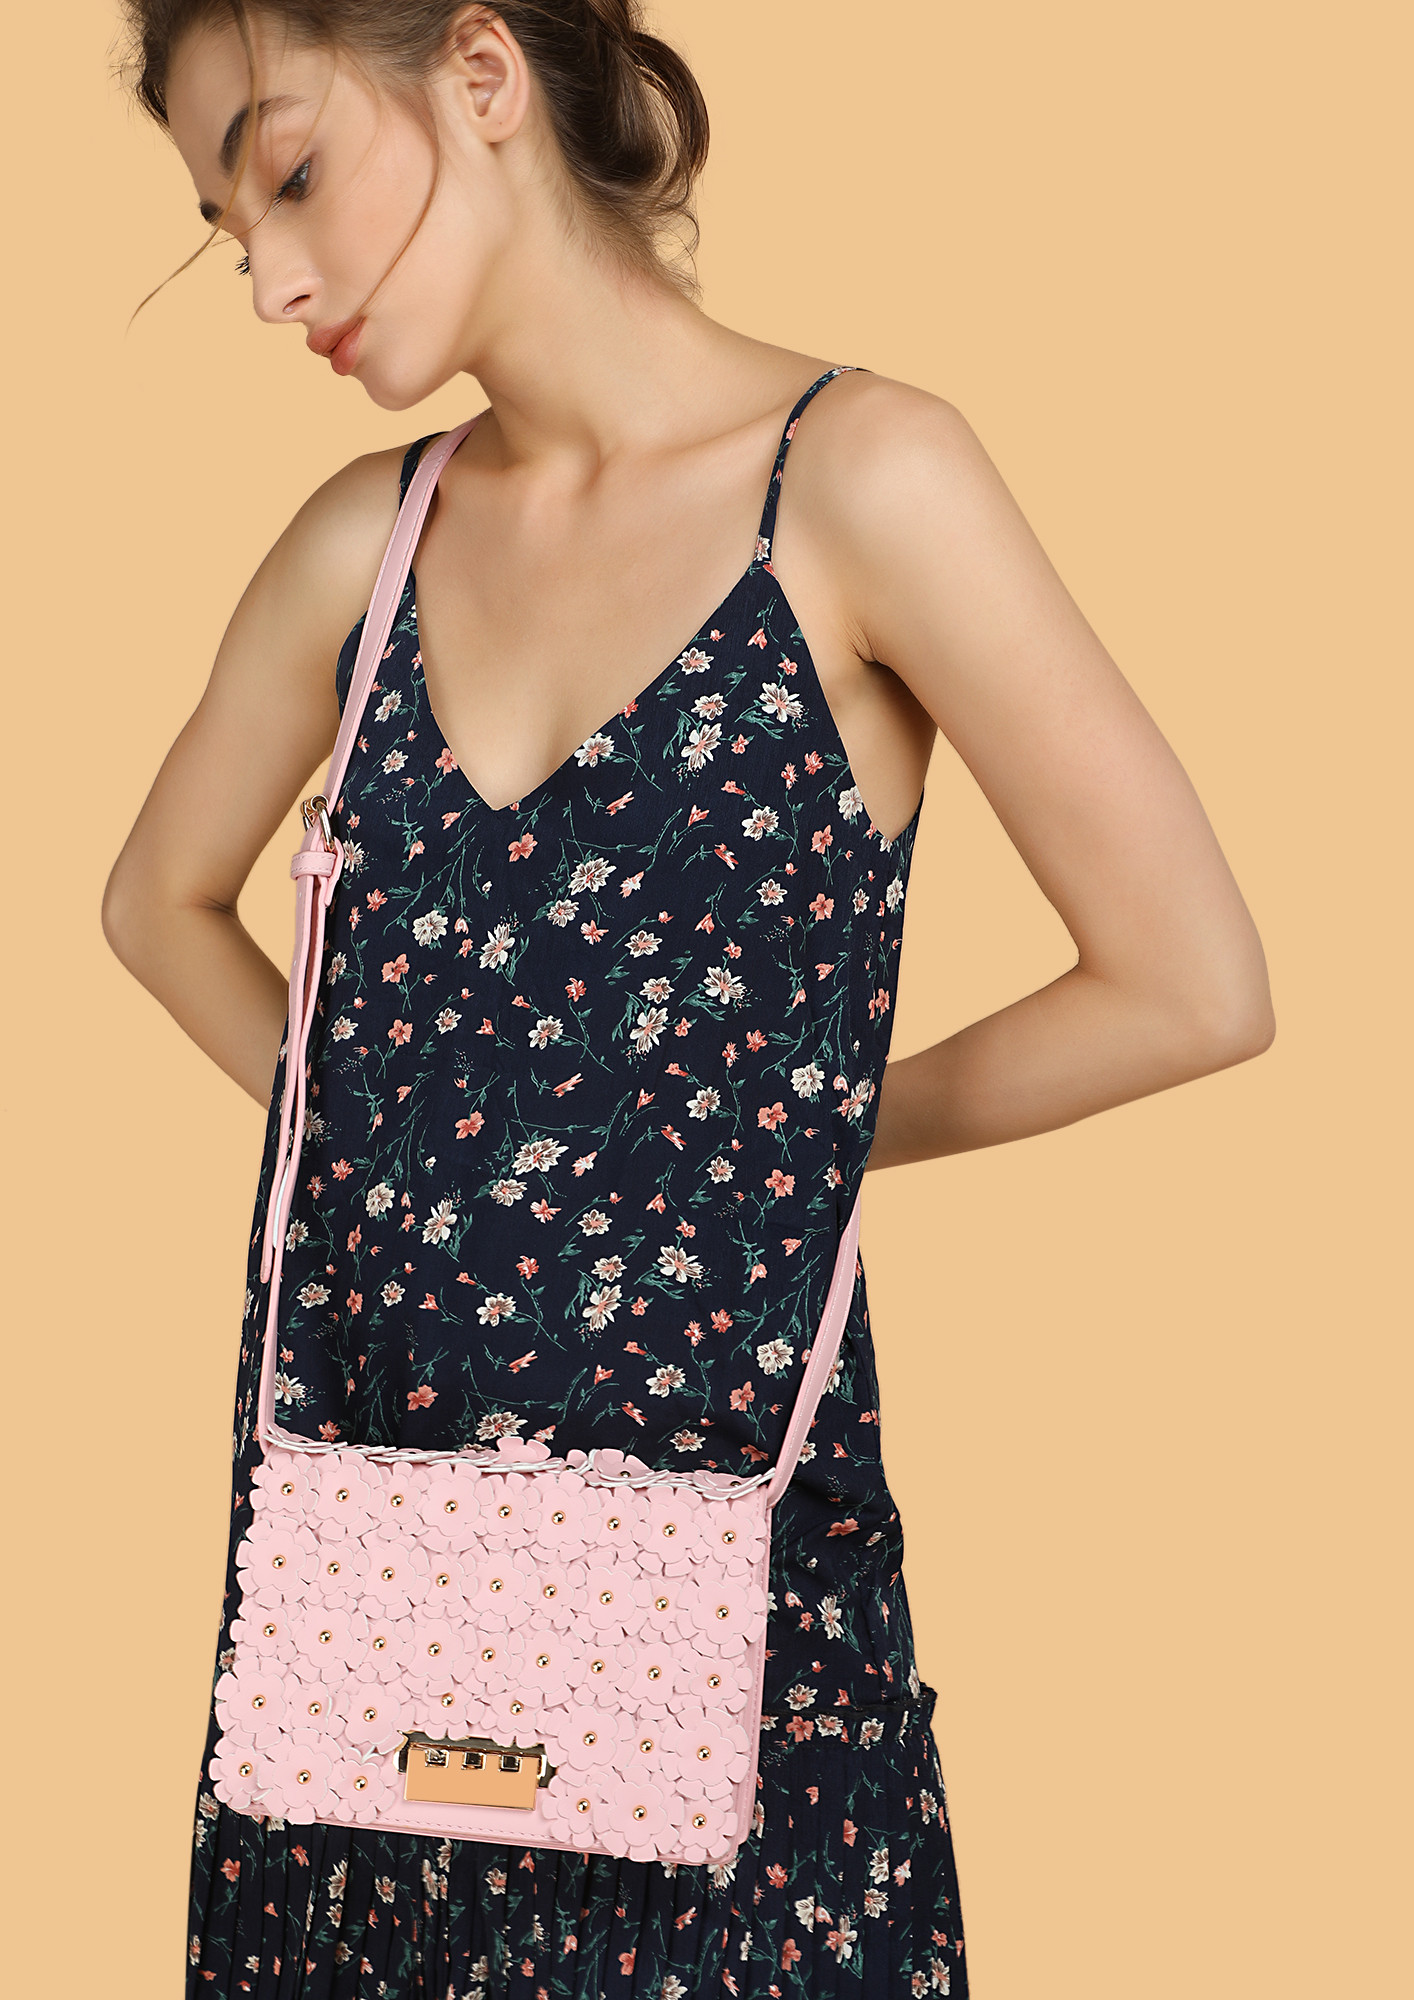 ALL PRETTY FLORALS ON ME PINK SLING